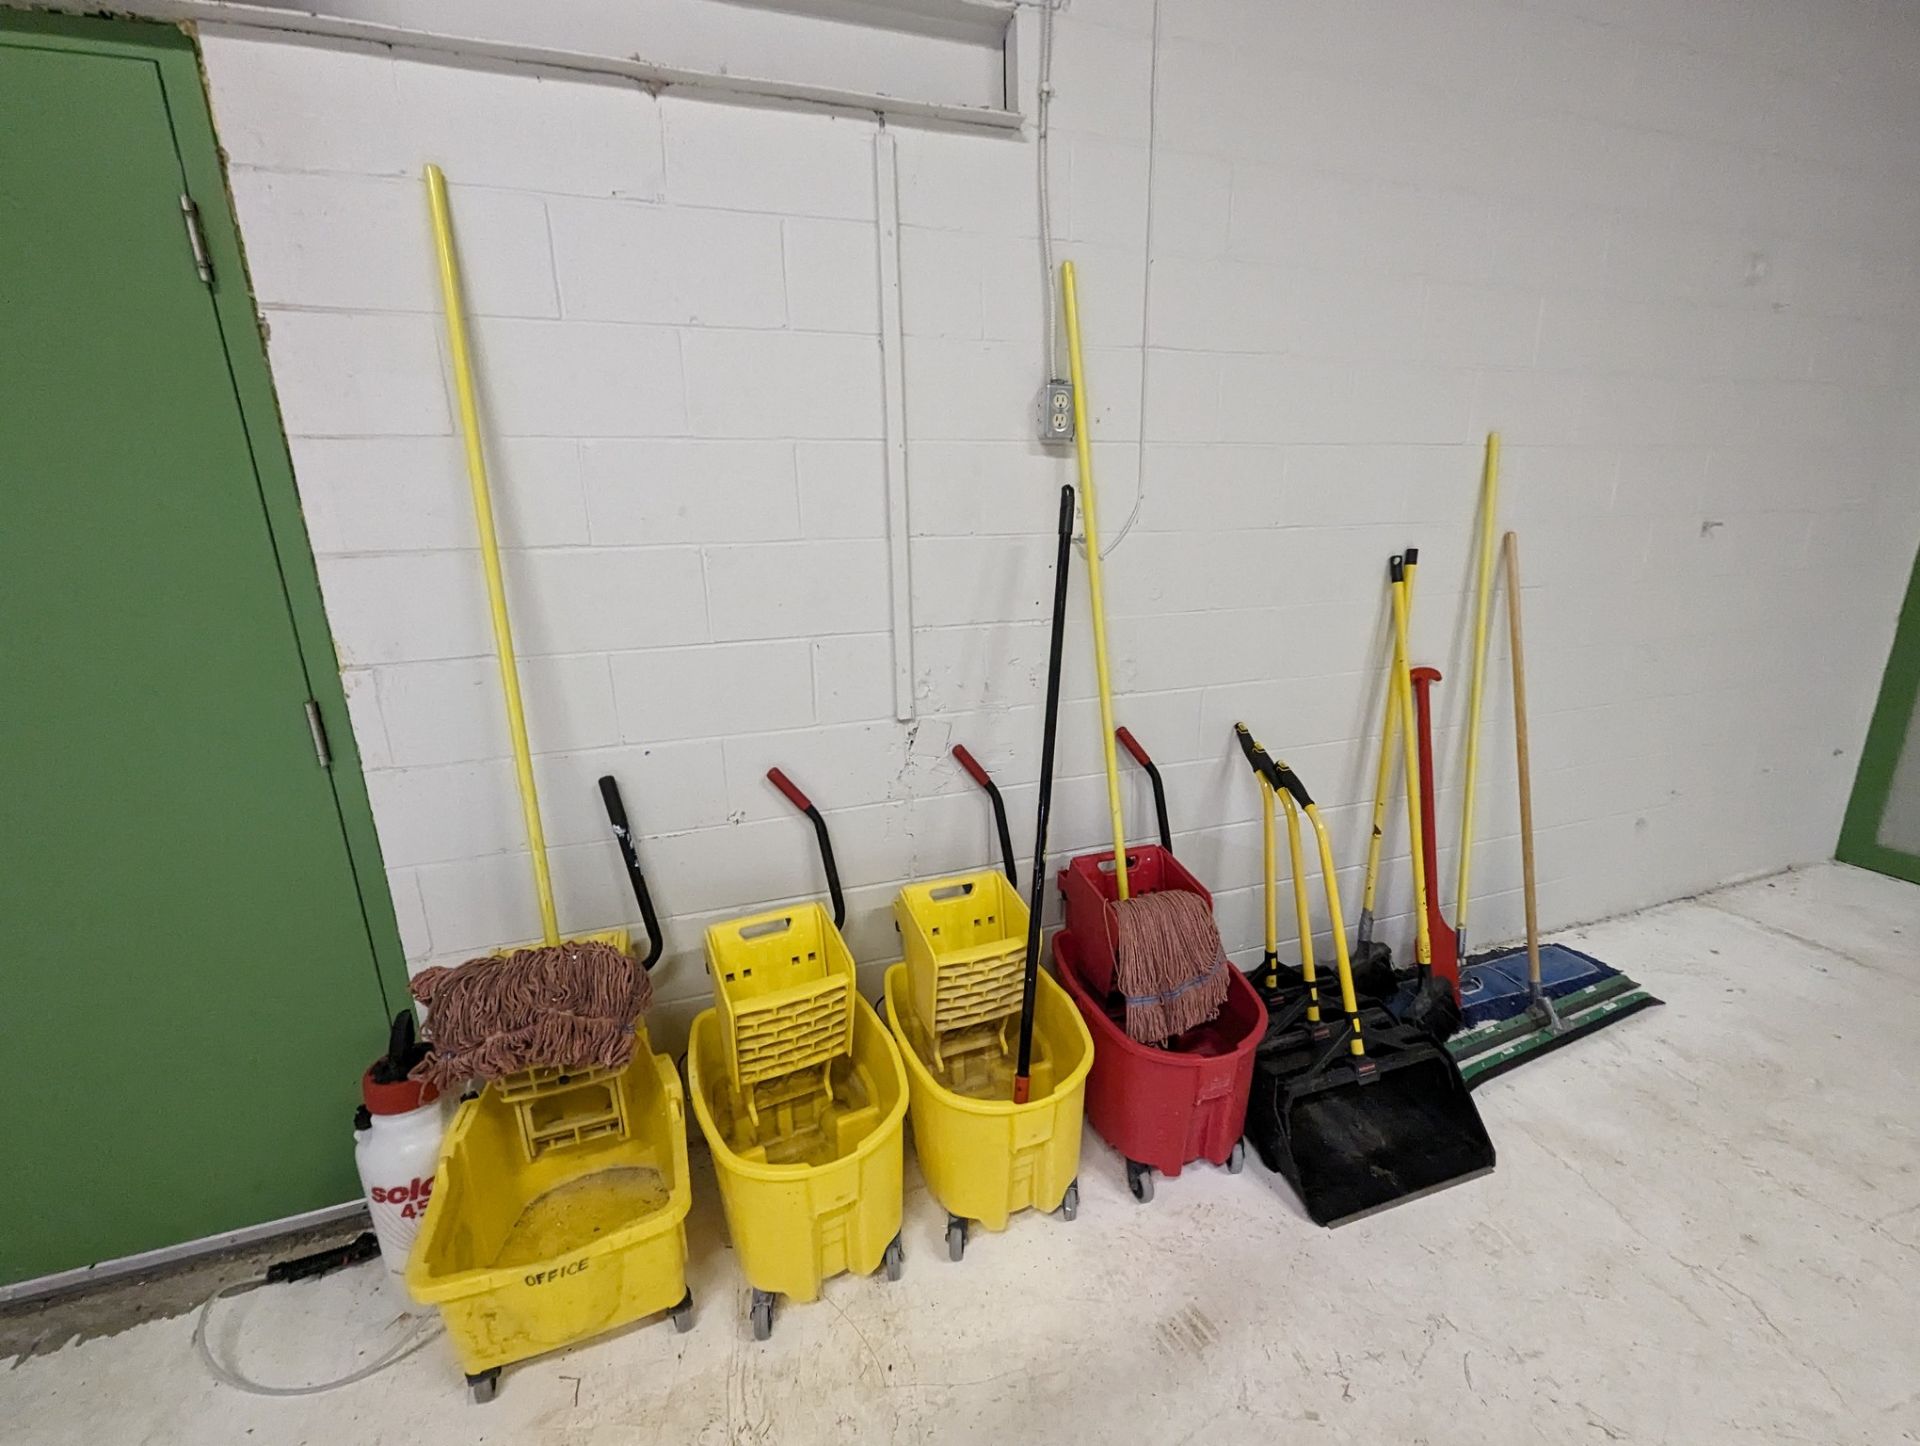 LOT OF ULINE GARBAGE CANS, MOPS, BUCKETS, BROOMS, PORTABLE SPRAYER, ETC. - Image 2 of 2